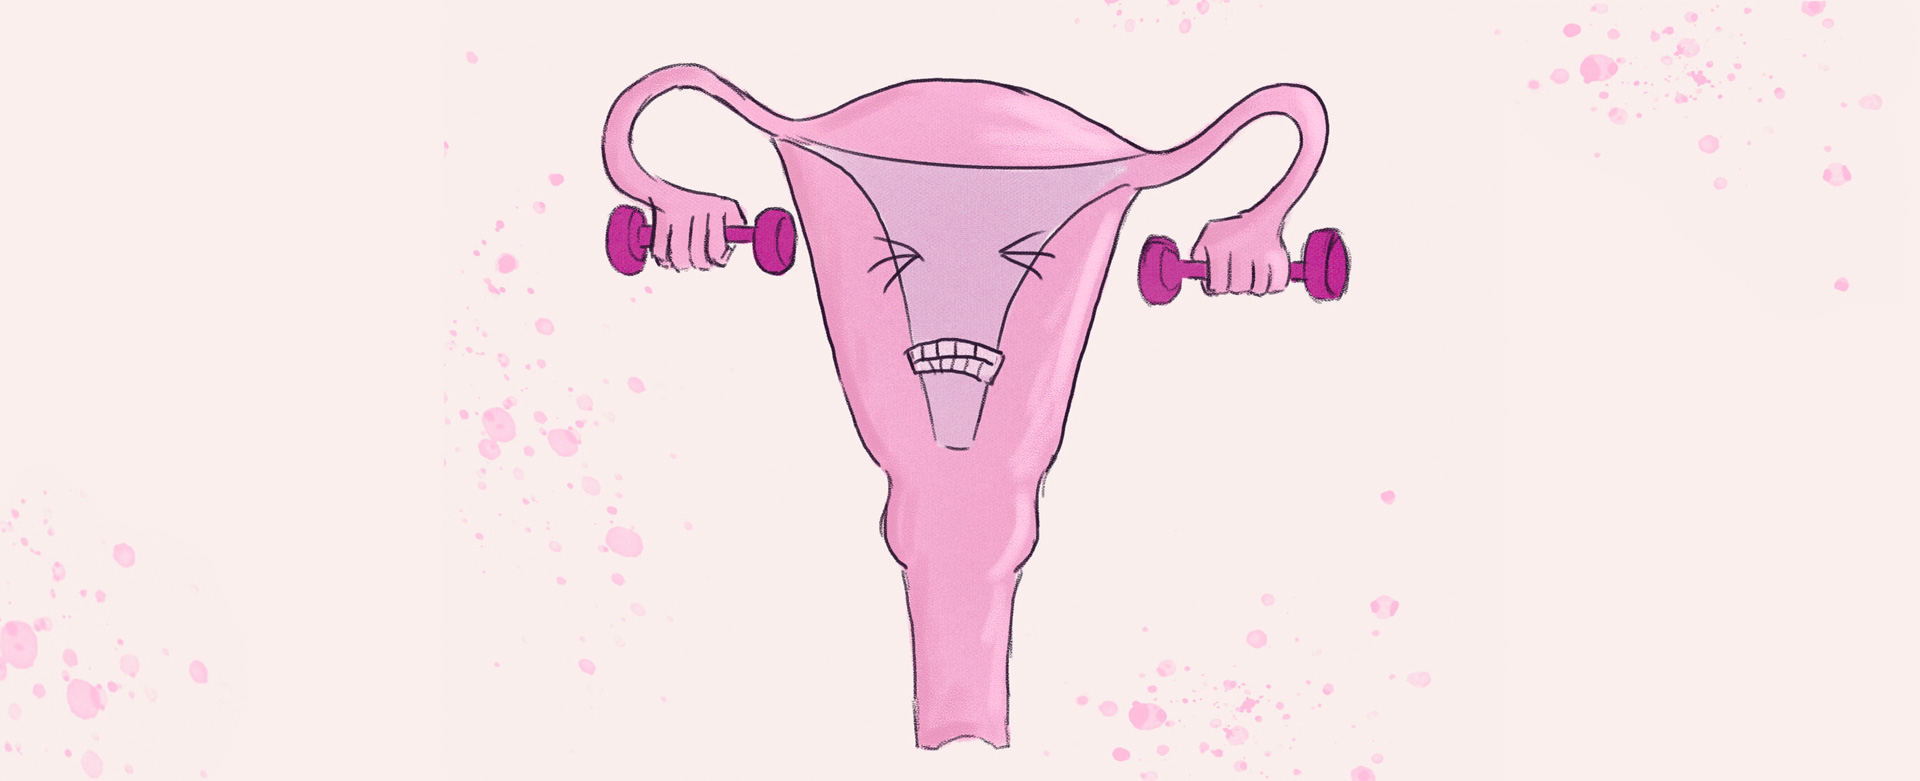 Illustration a vagina, where the ovaries are muscles lifting weights